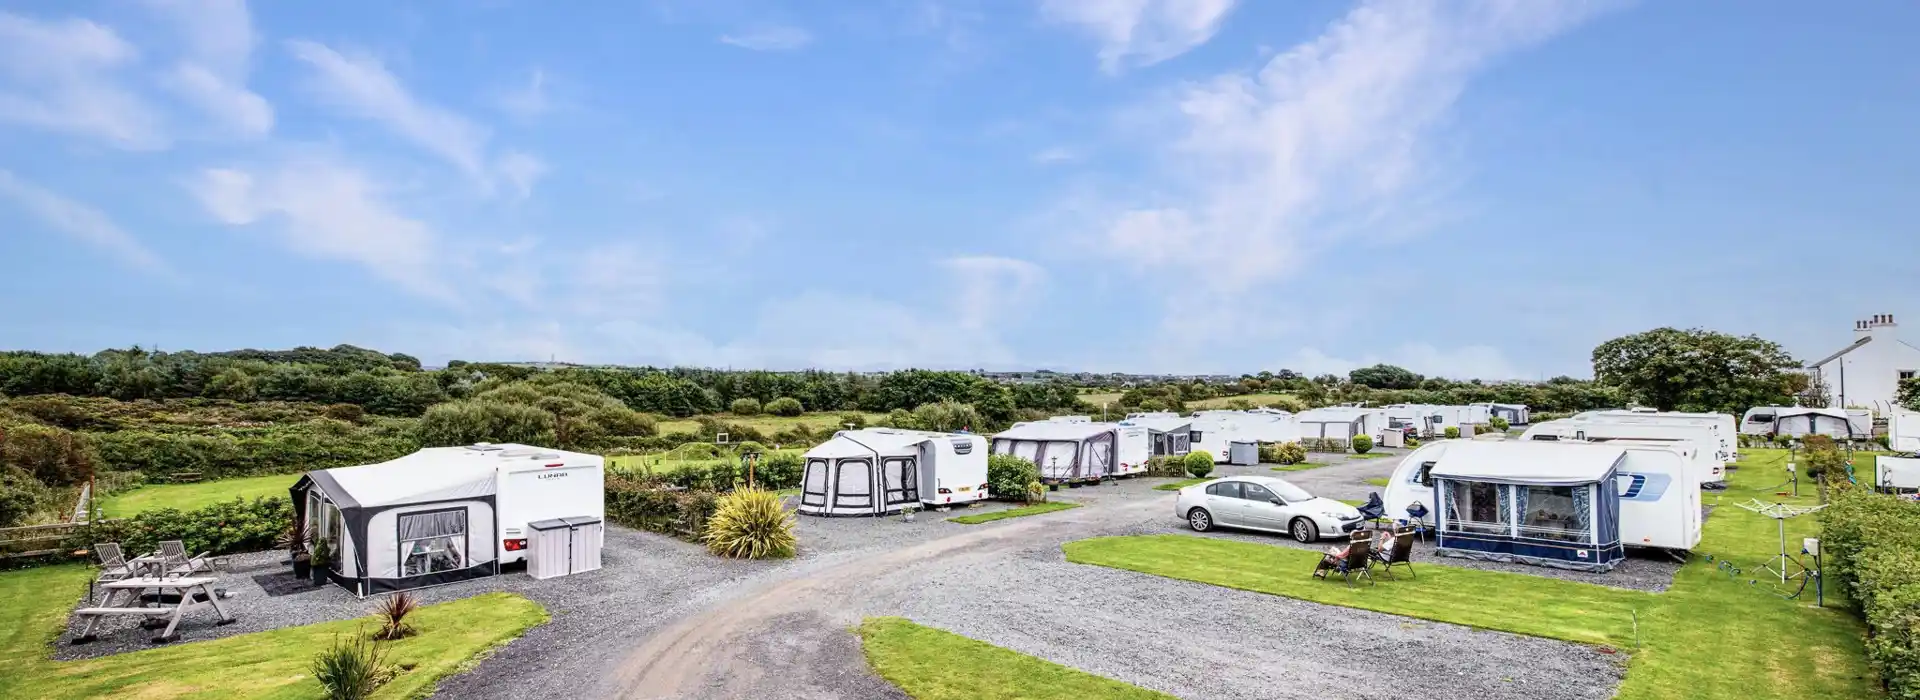 Adult only campsites in North Wales